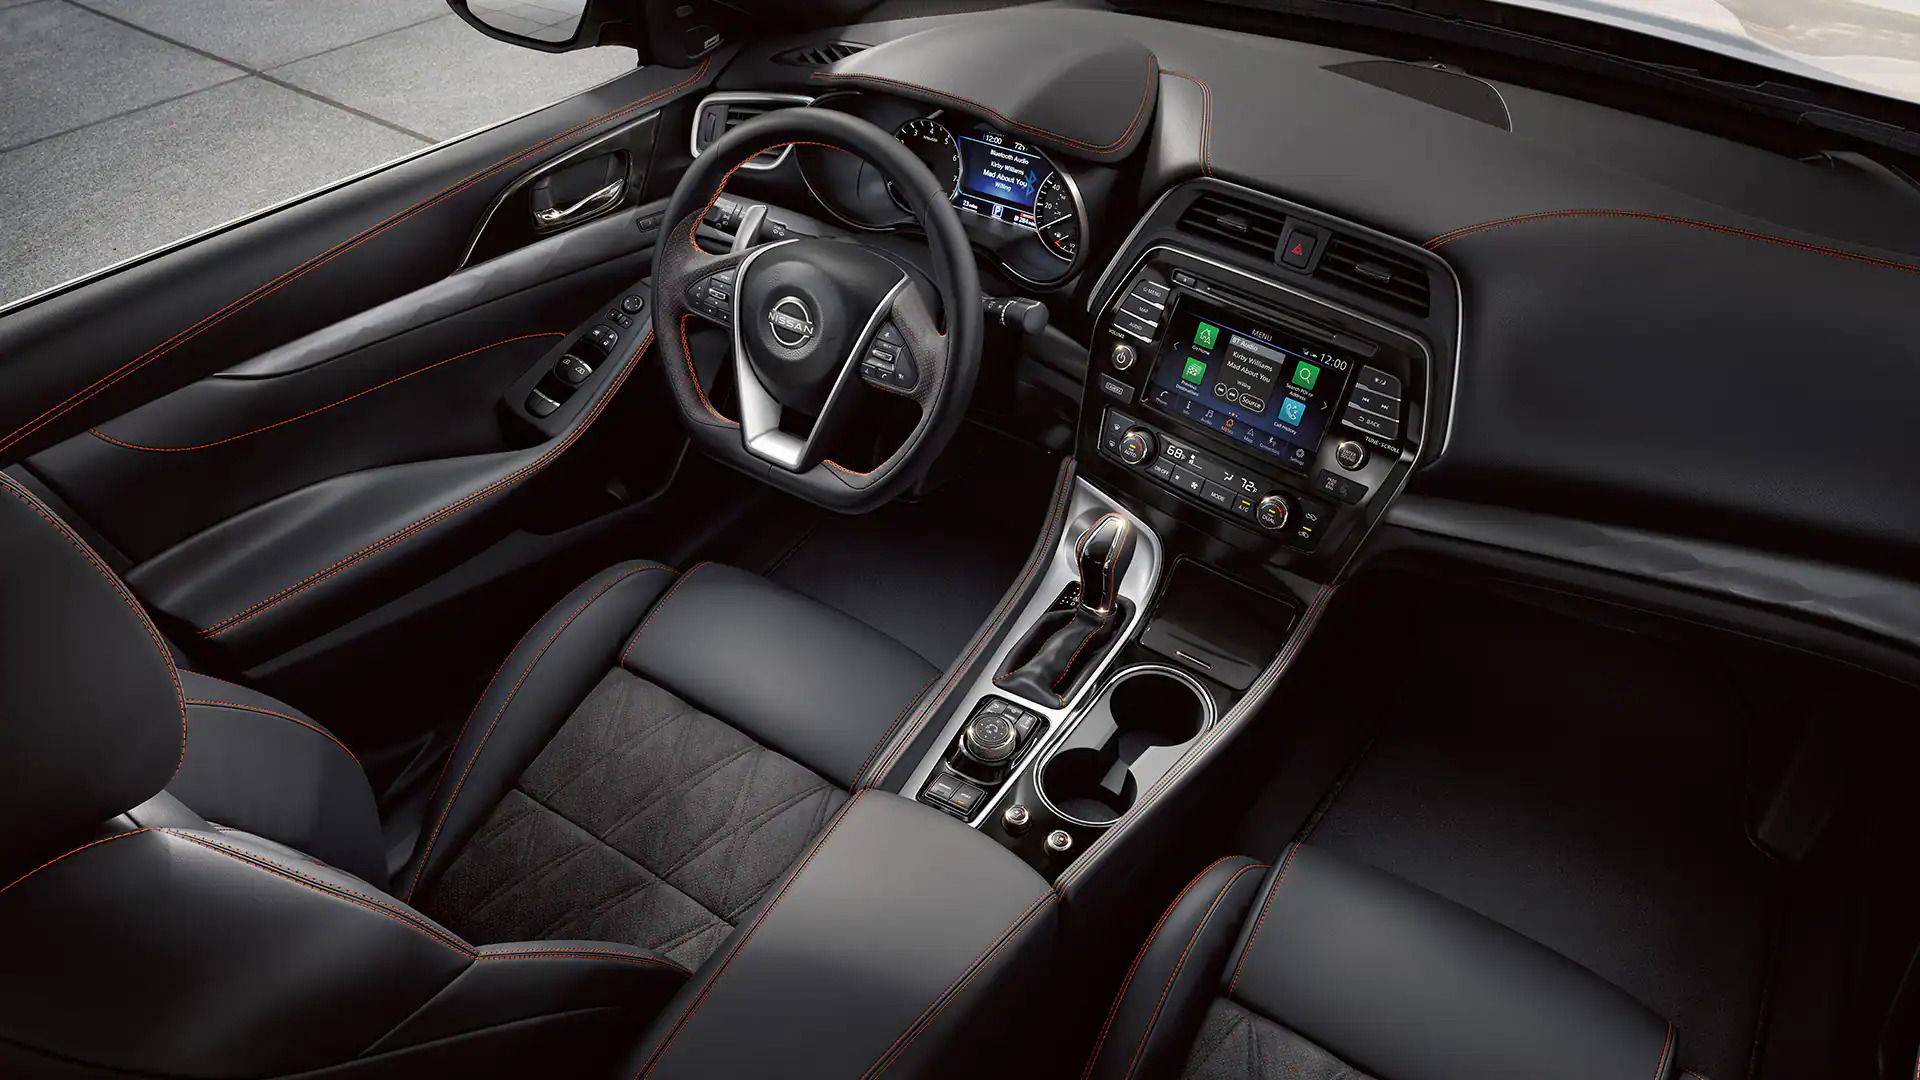 2023-nissan-maxima-black-interior-with-red-contrast-stitching Via Nissan.